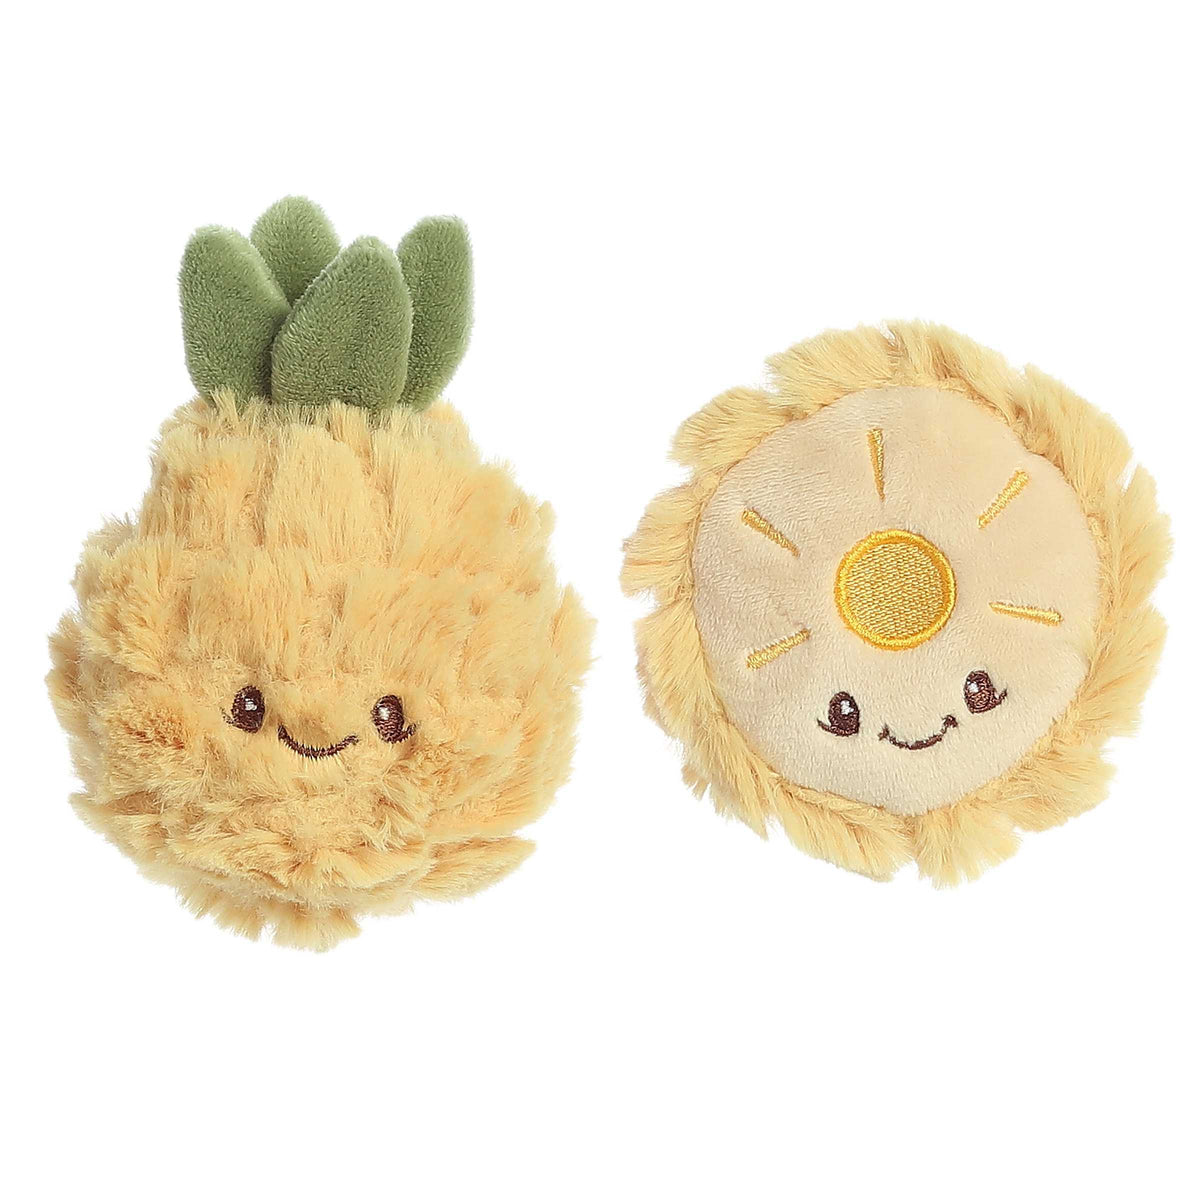 Playful Pineapple plush toy set with pineapple rattle and slice crinkle, designed with a yellow fur and smiling face